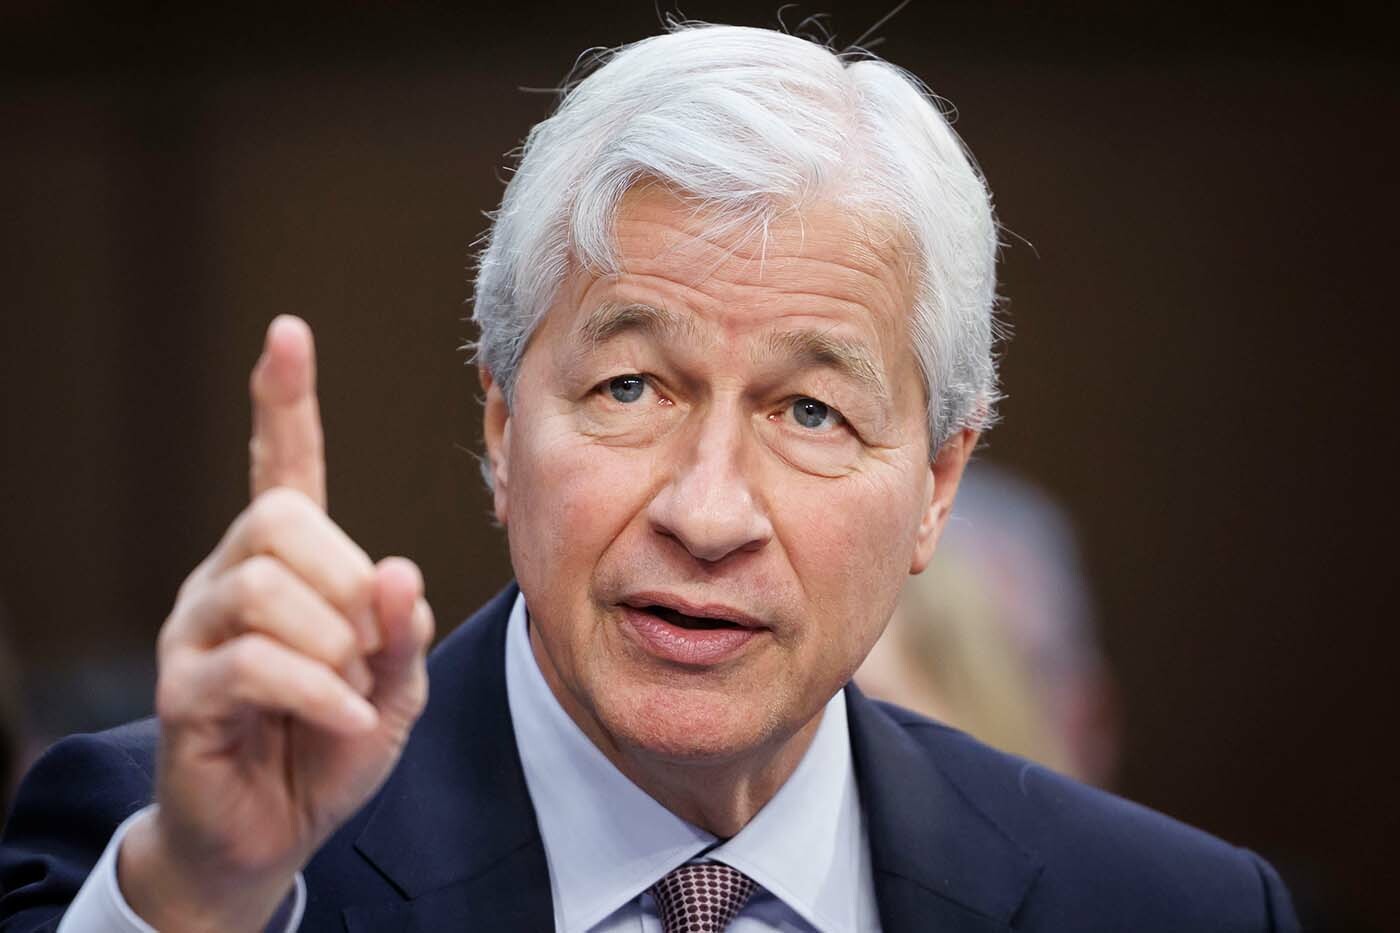 CRYPTONEWSBYTES.COM Jamie-Dimons-Critique-of-Bitcoin-Amid-Financial-Innovations-and-Challenges Jamie Dimon's Critique of Bitcoin Amid Financial Innovations and Challenges  